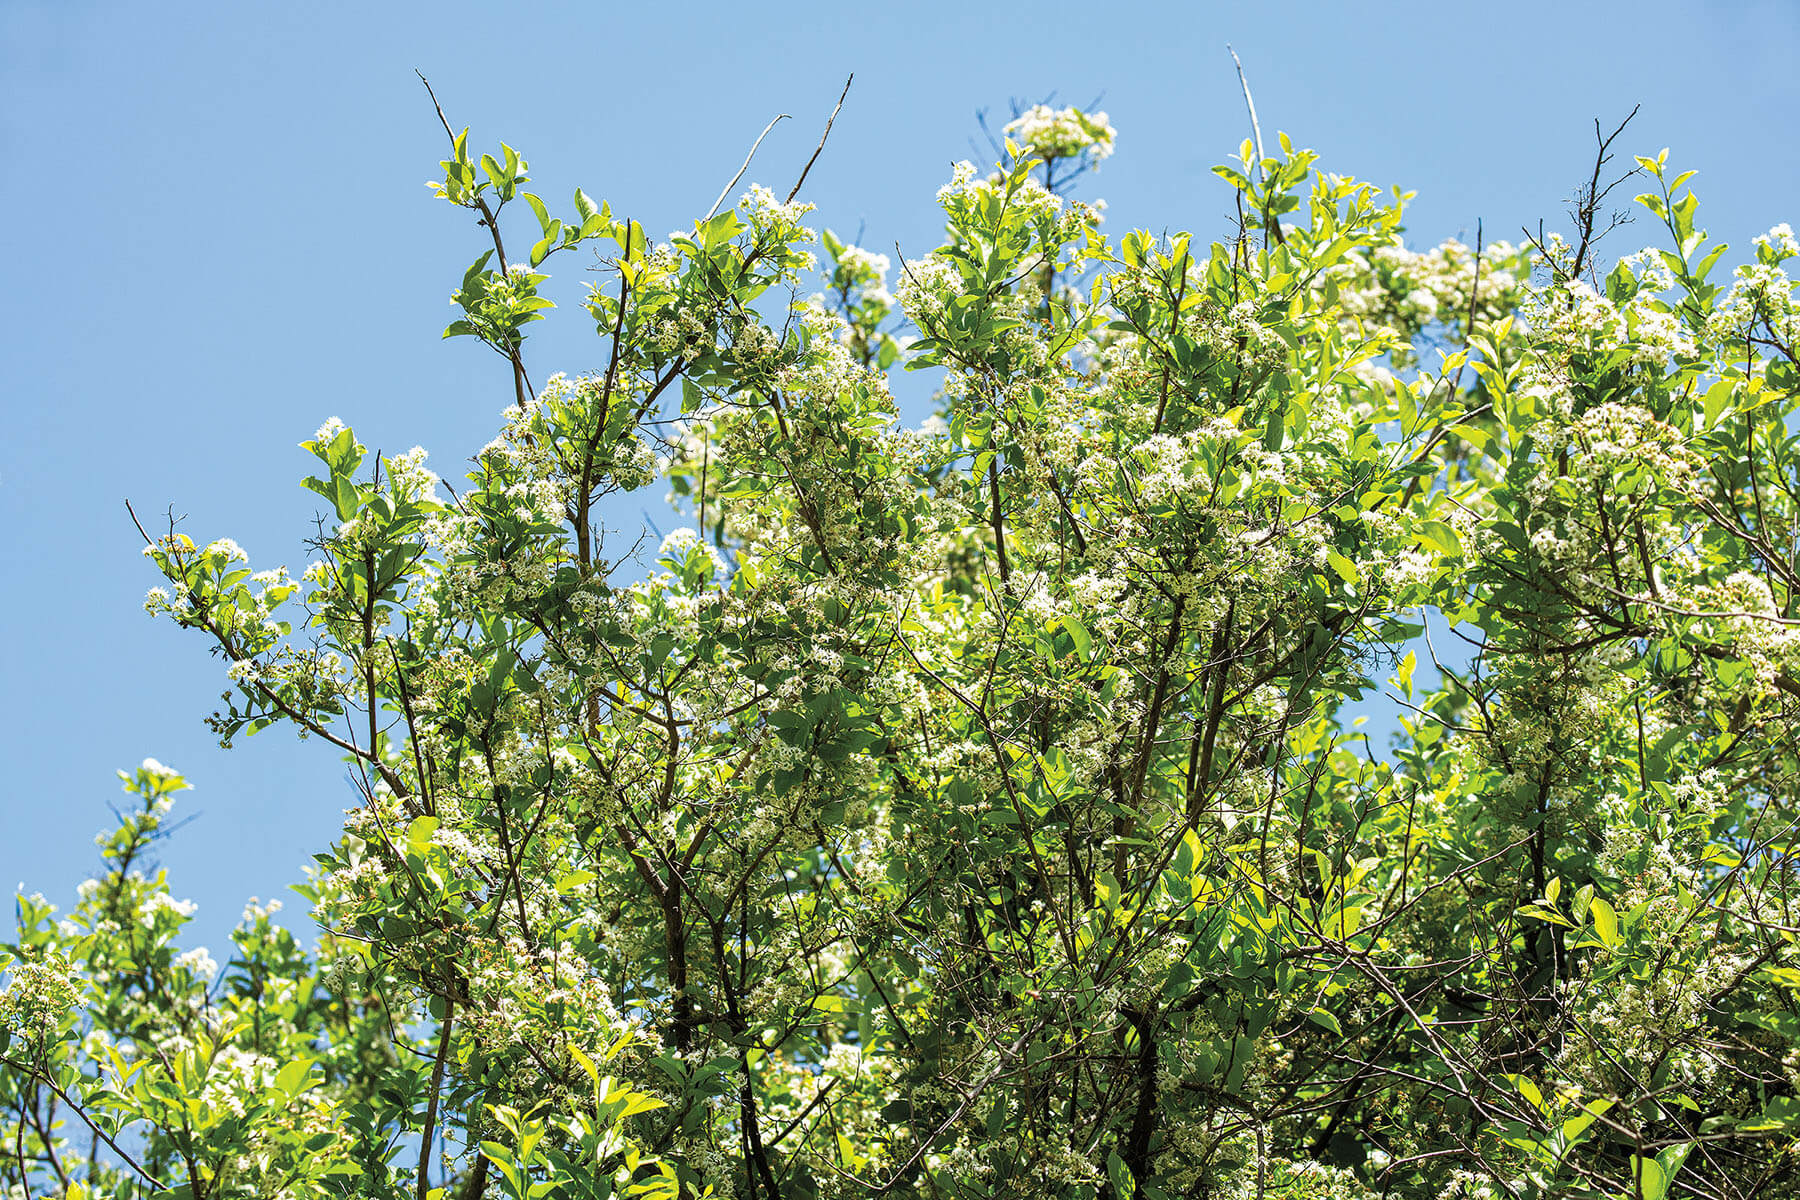 Bright yellow flowers and green branches on a tree in front of blue sky